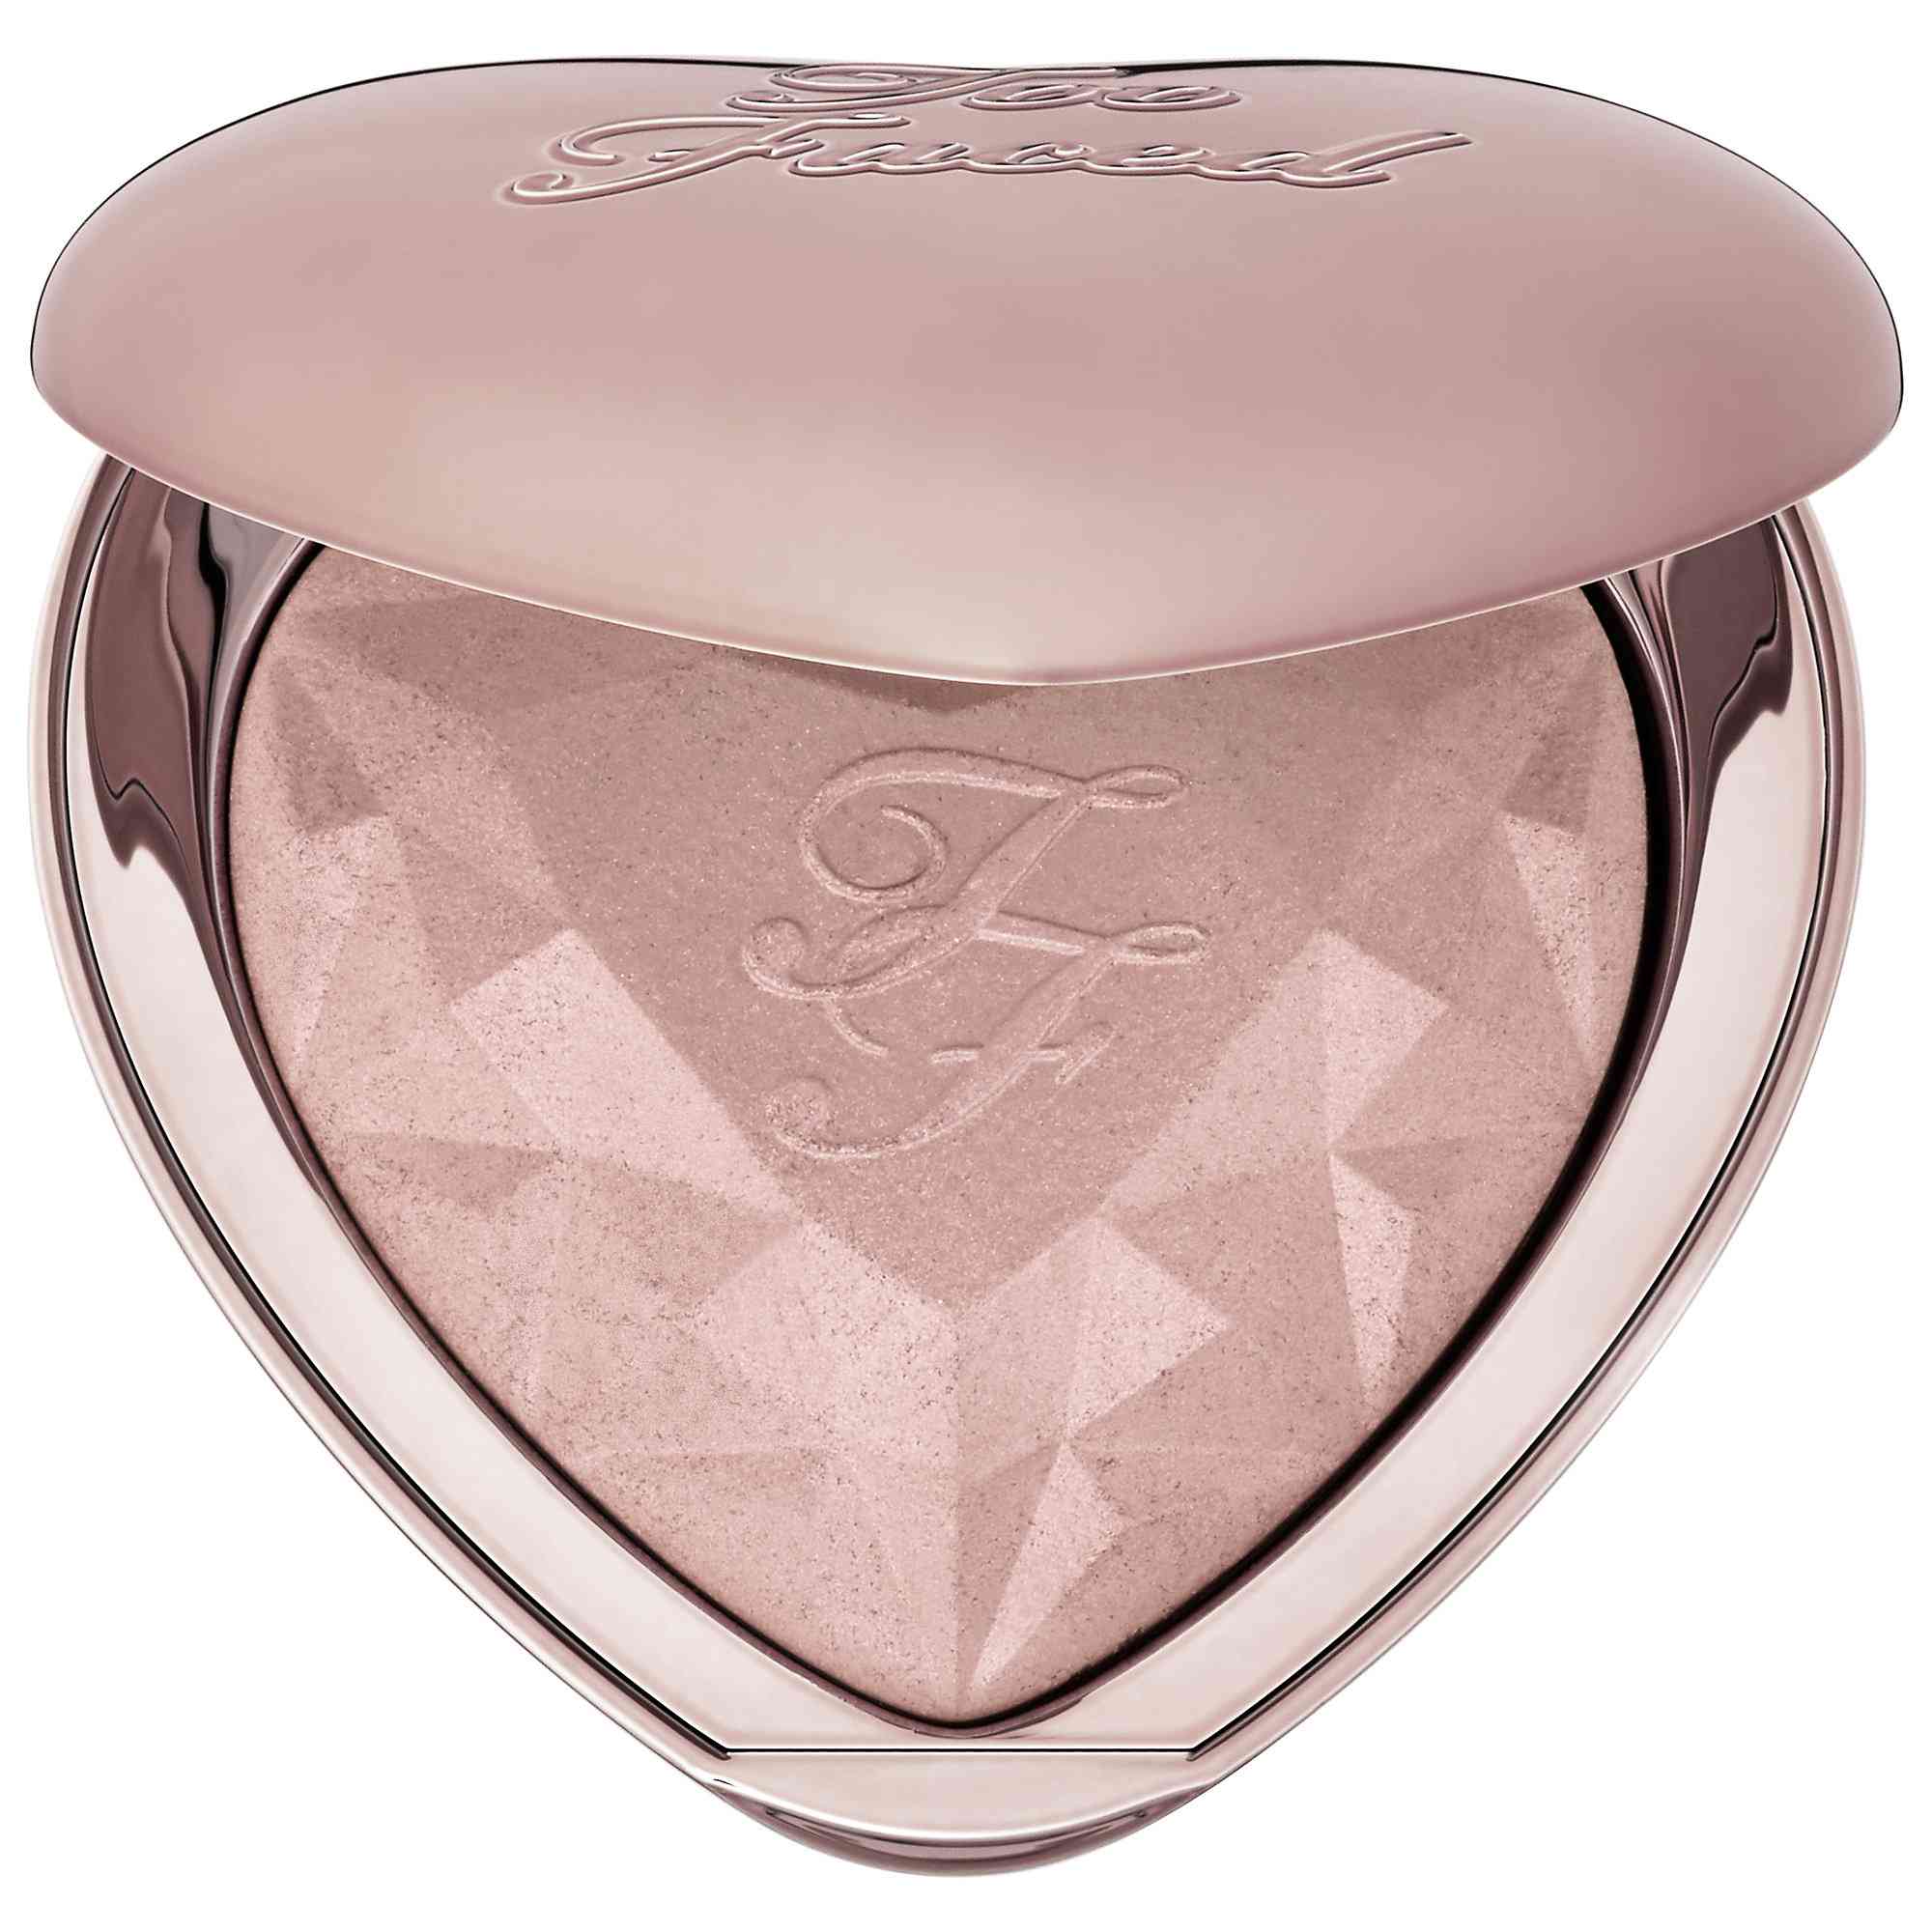 Too Faced Love Light Prismatic Highlighter - Champagne